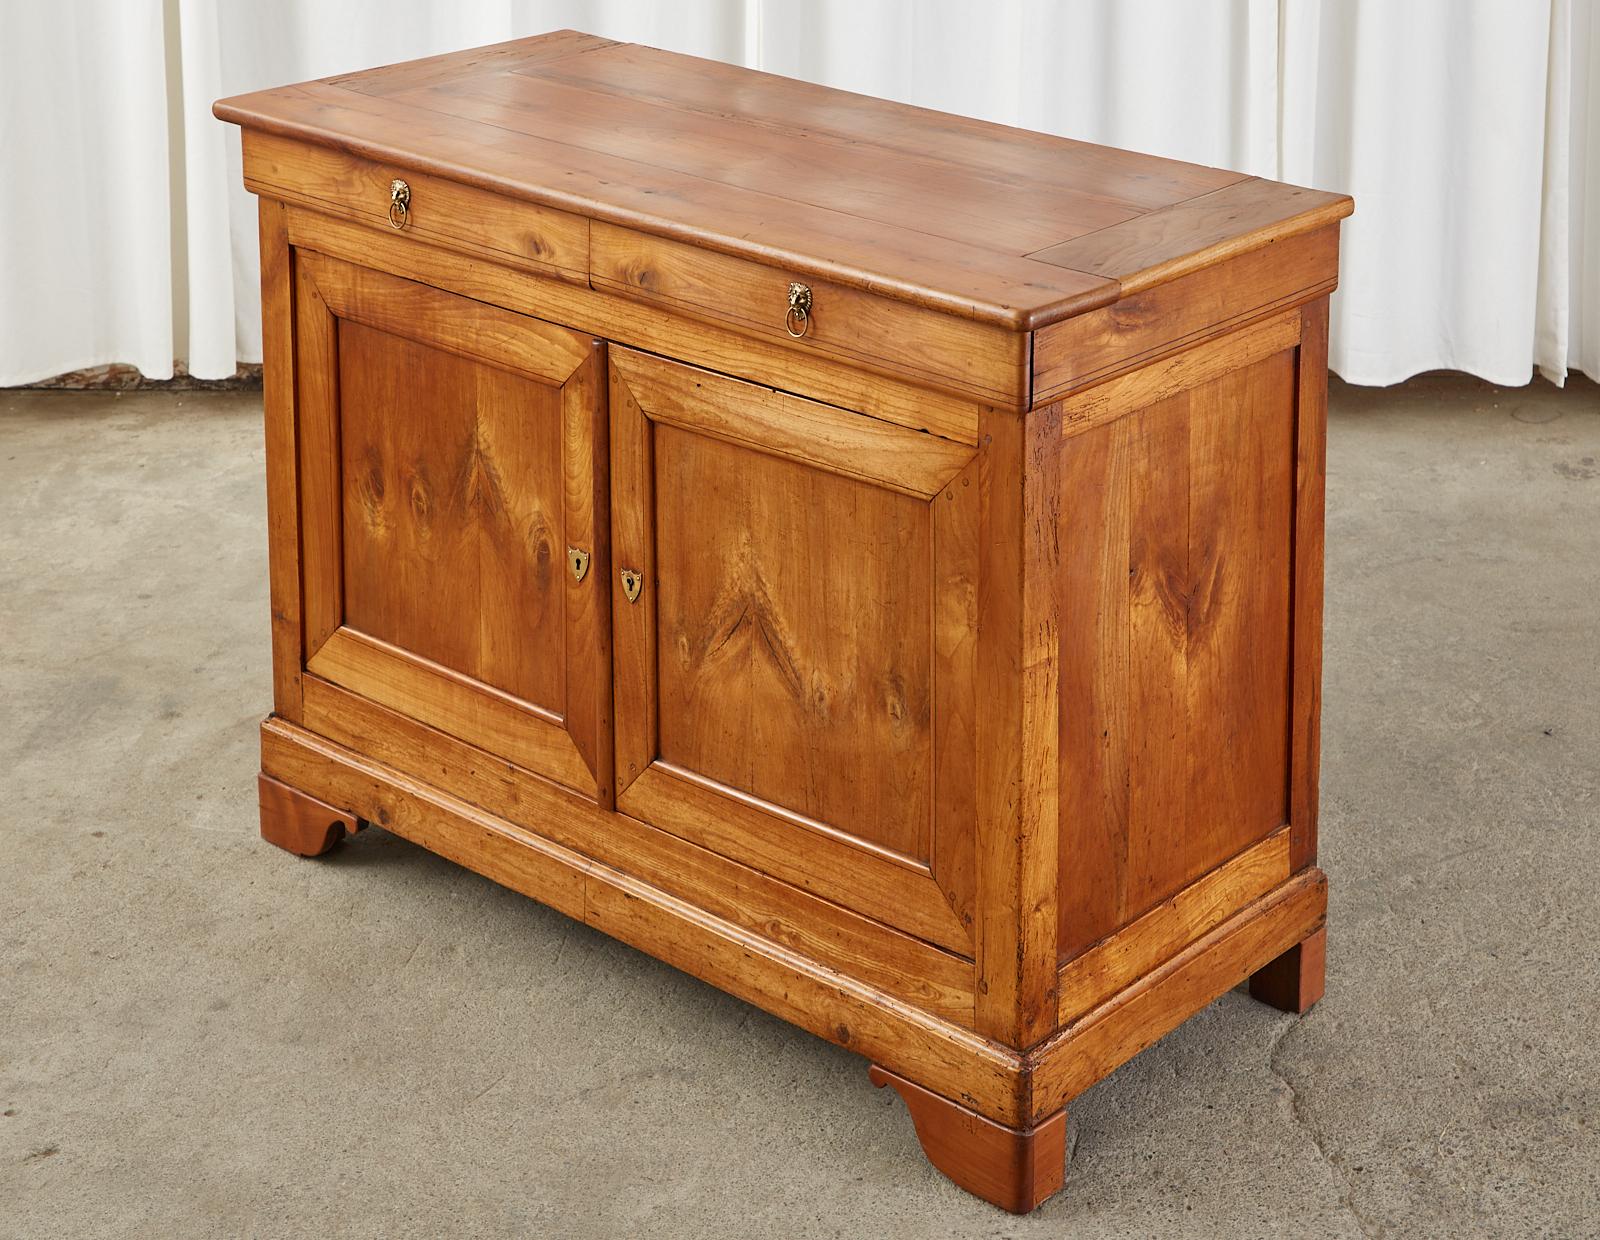 Handsome early 19th century French Louis Philippe period sideboard cabinet, or buffet server. Crafted from radiant grained fruitwood with excellent joinery and craftsmanship. The top of the case has two fitted storage drawers with brass lions head